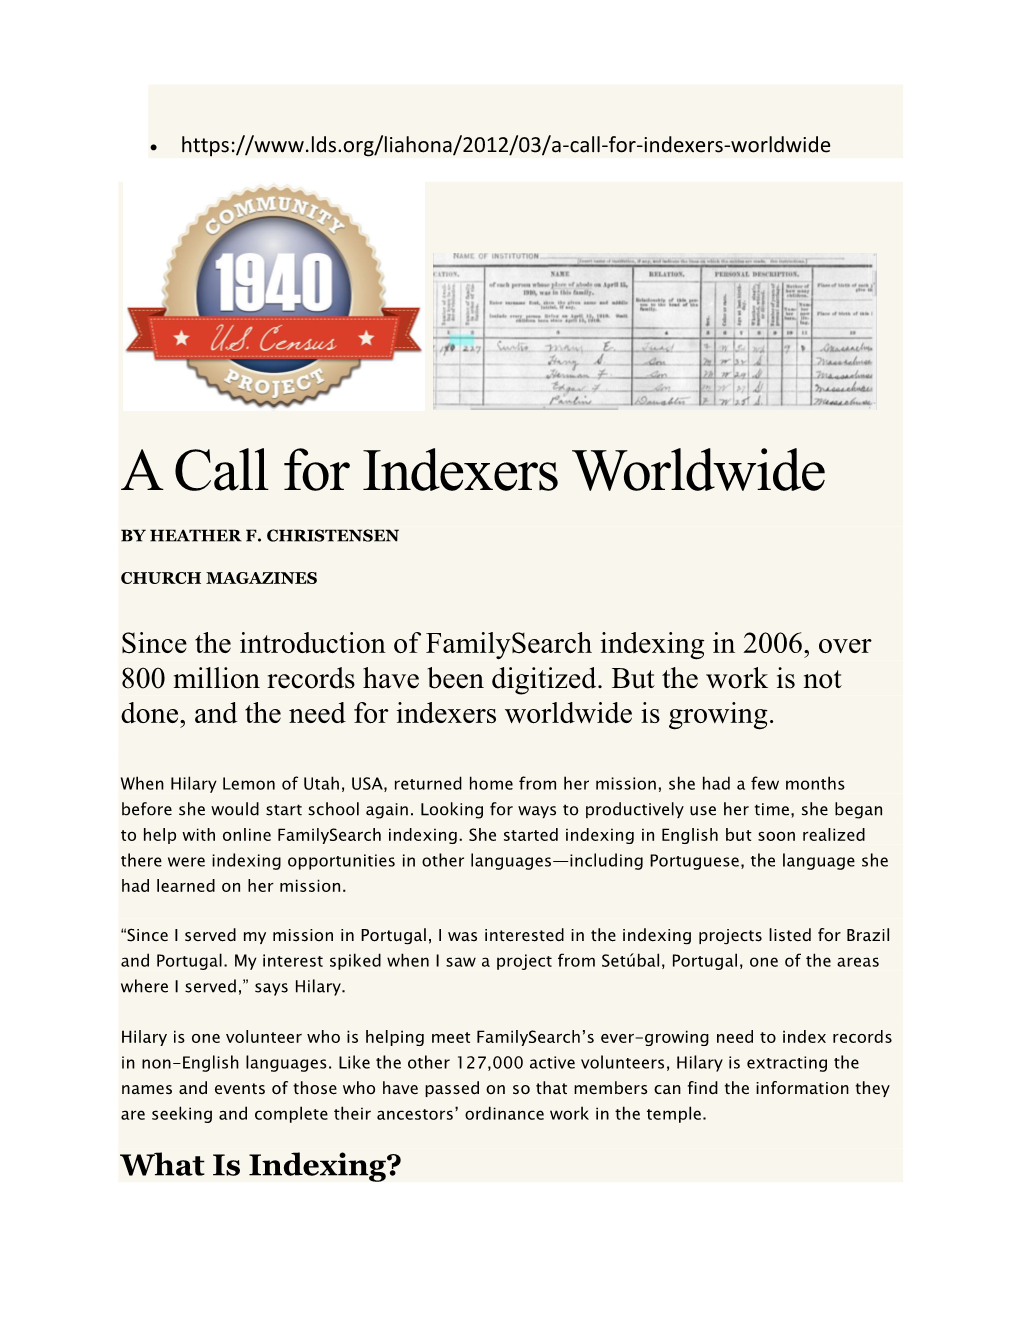 A Call for Indexers Worldwide